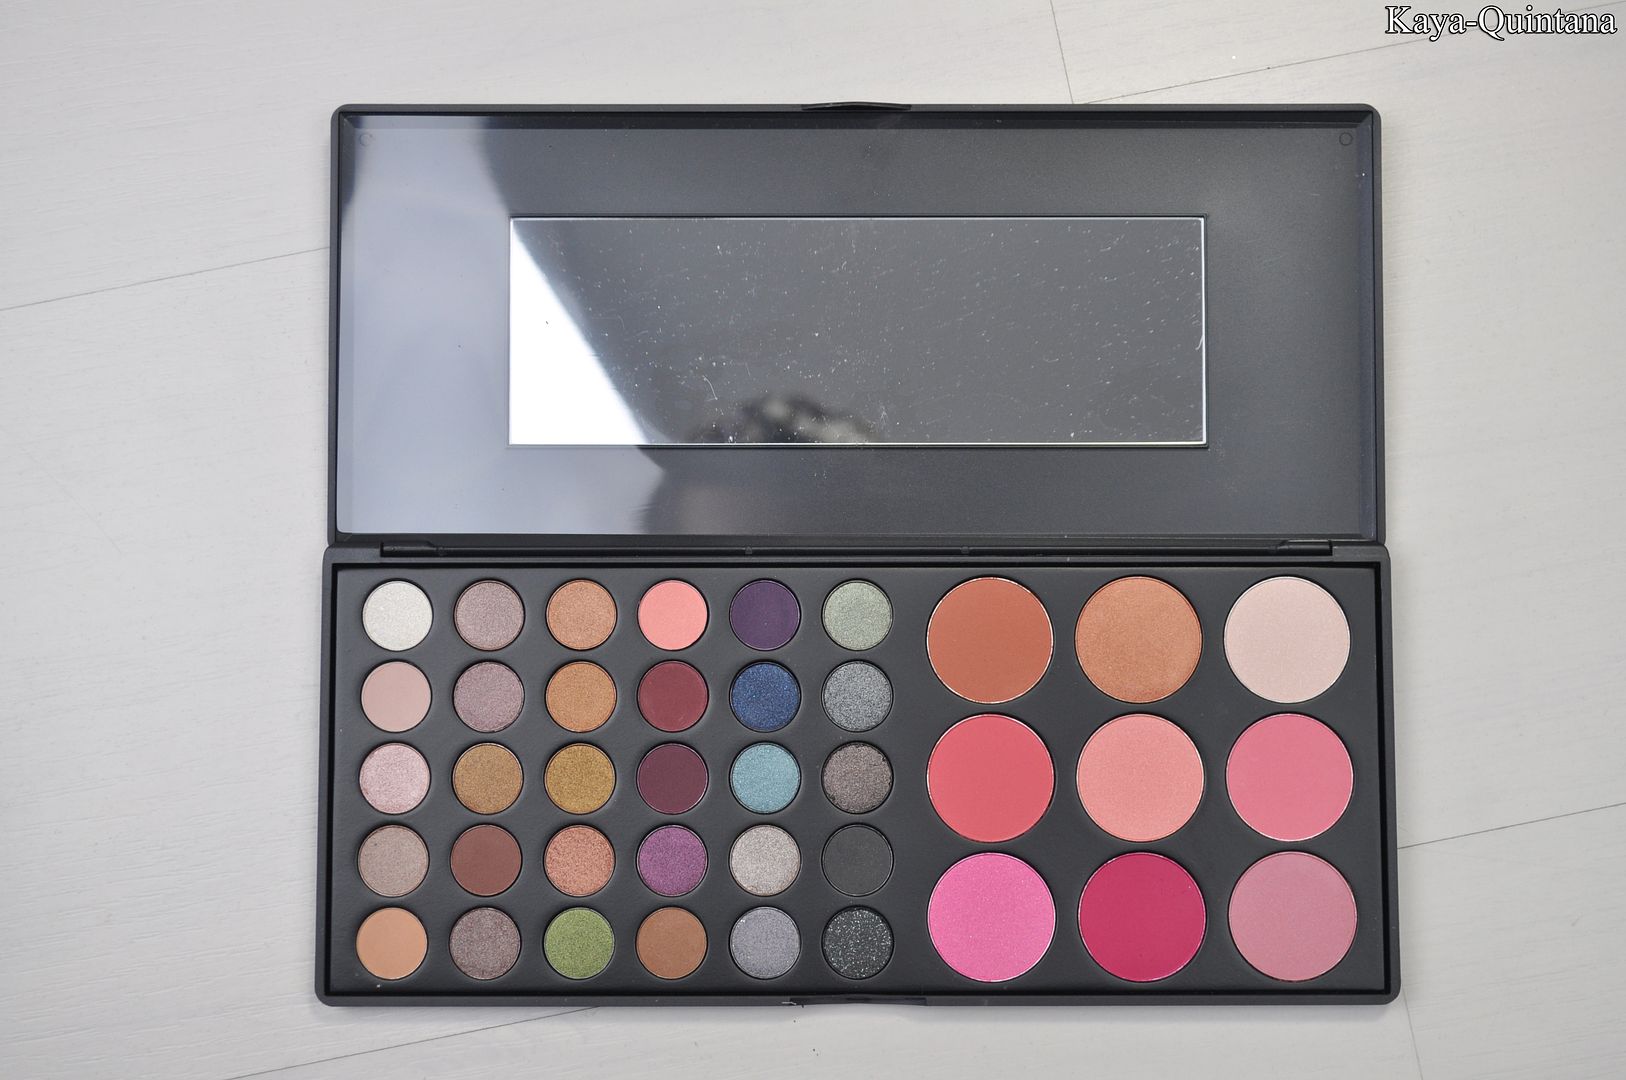 bh cosmetics special occasion palette